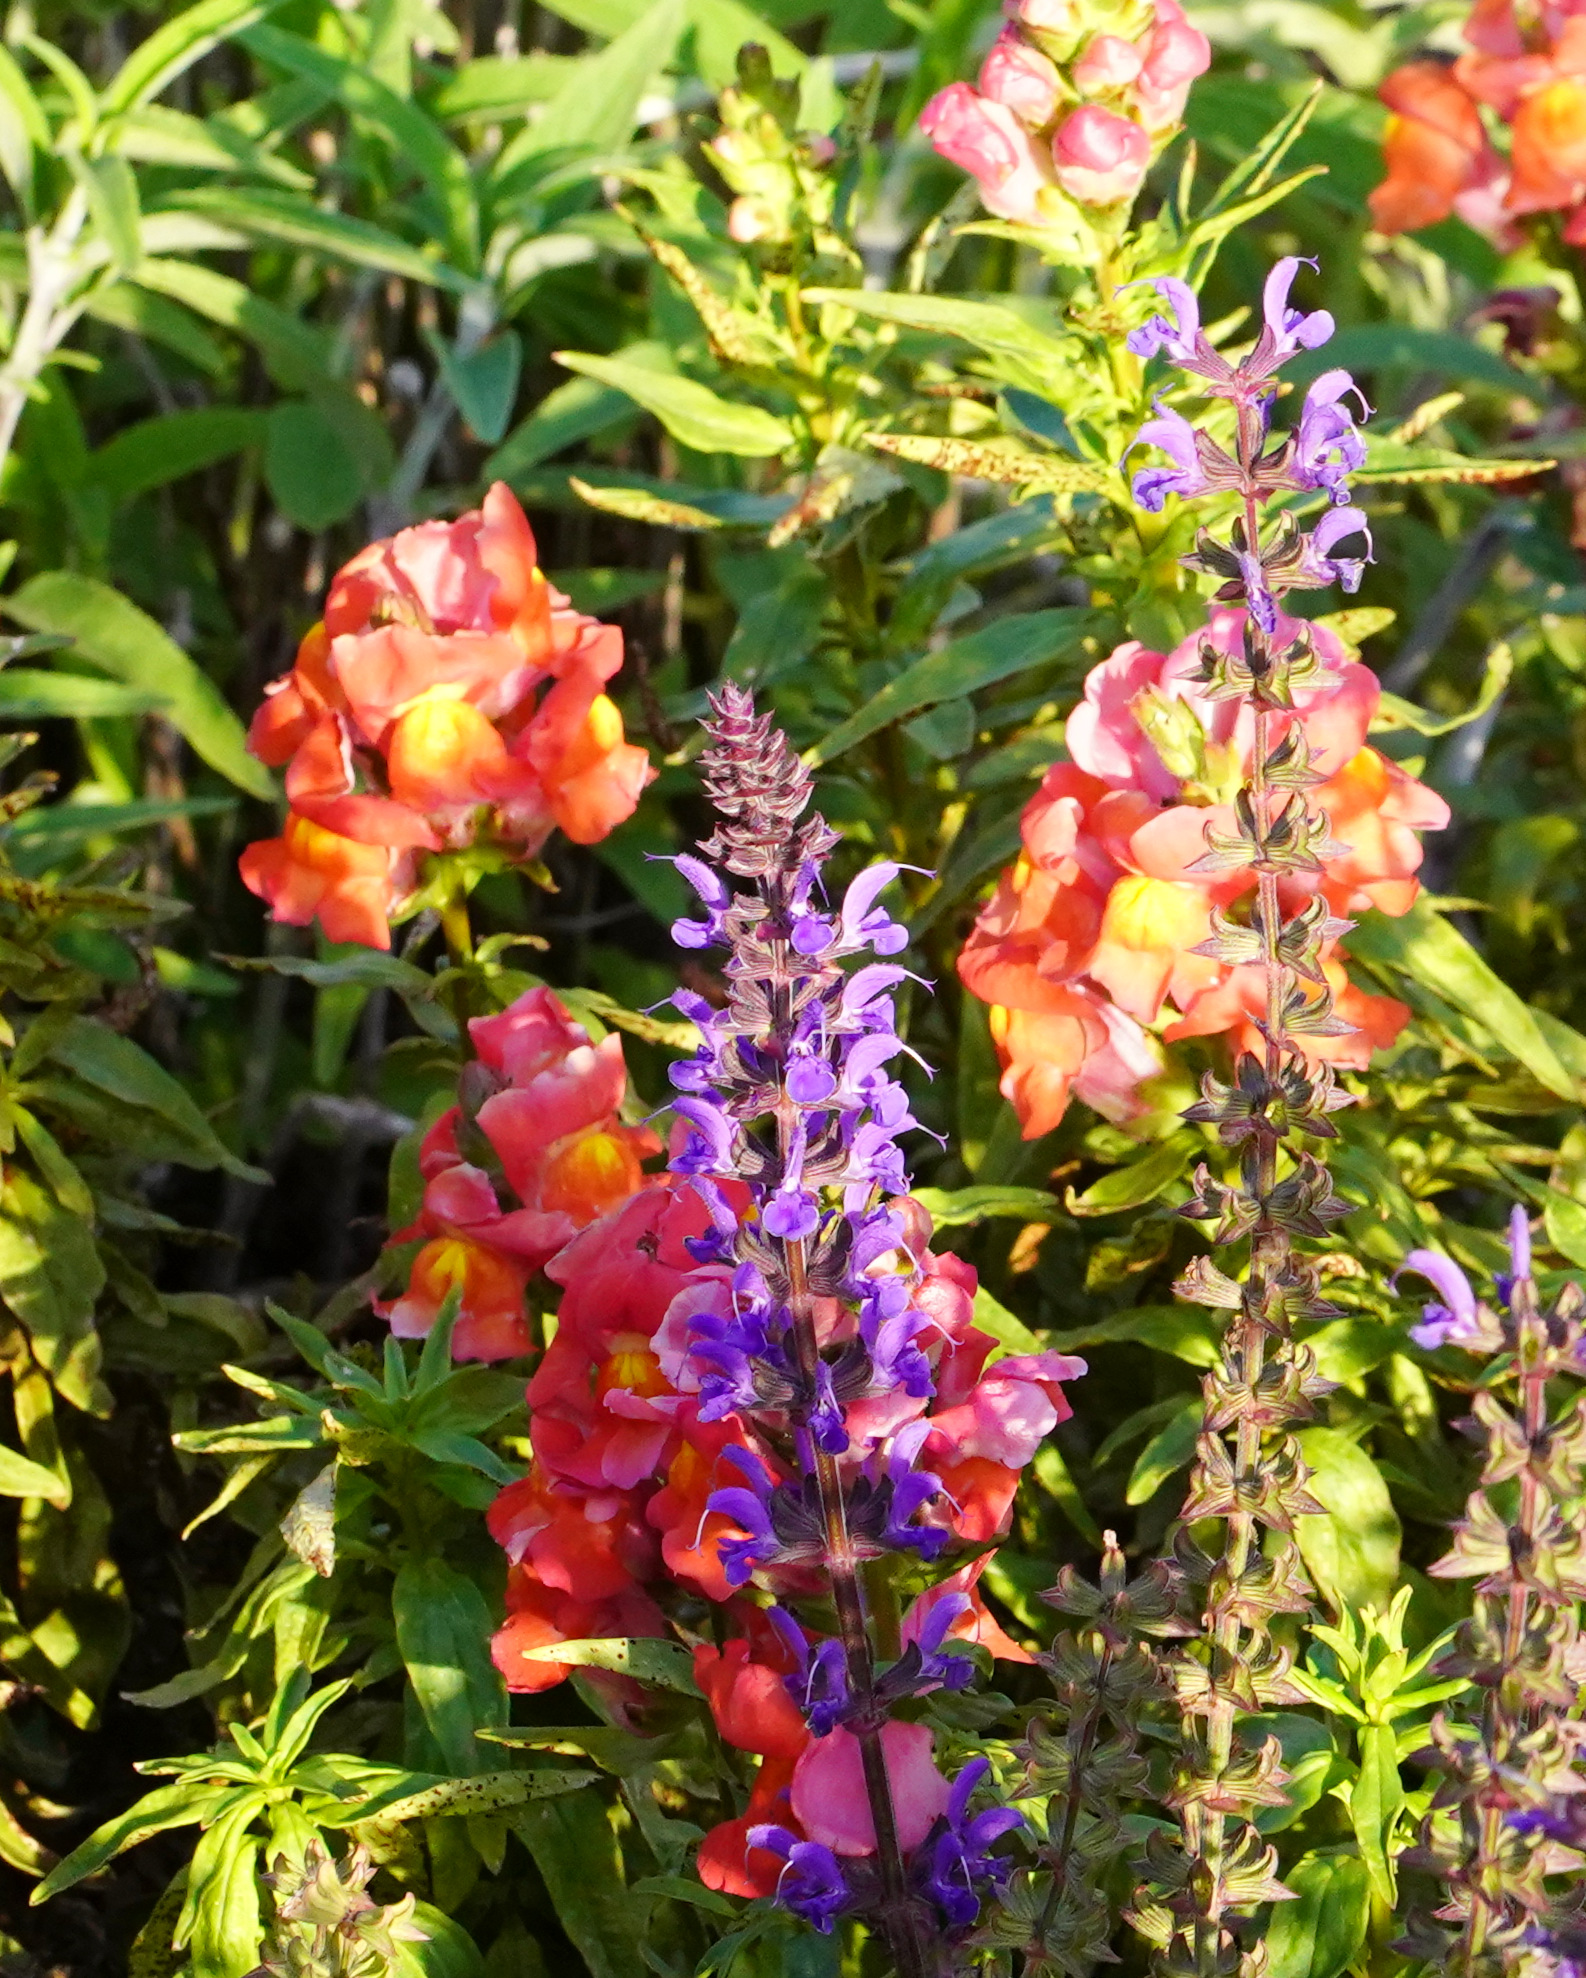 Snapdragons and purple salvia in the pollinator garden.